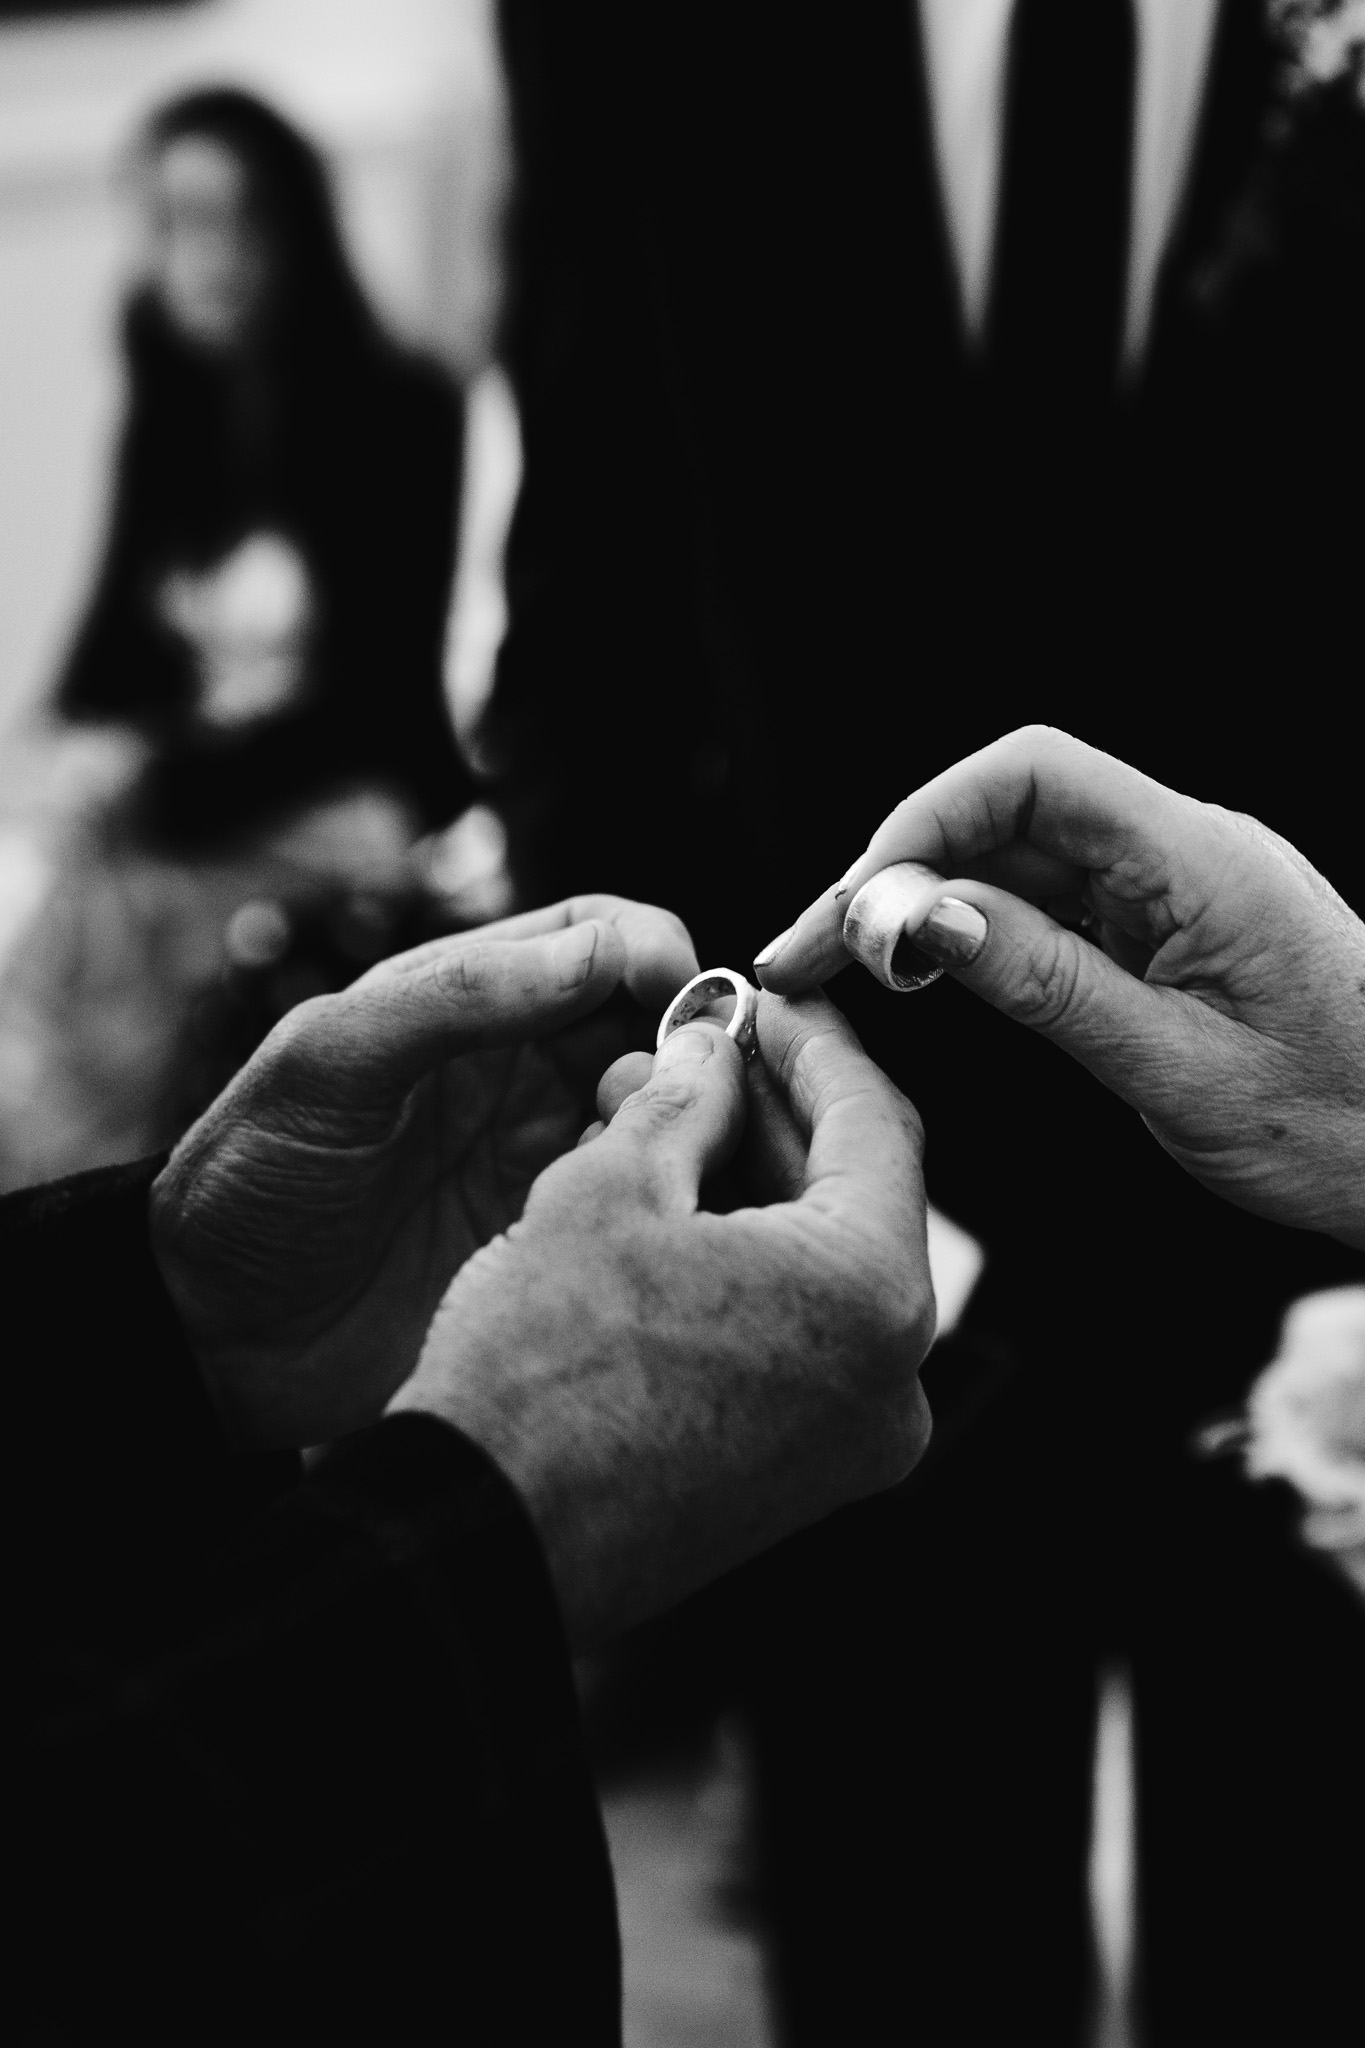 Close-up of the bride and groom exchanging their wedding rings during their wedding ceremony.